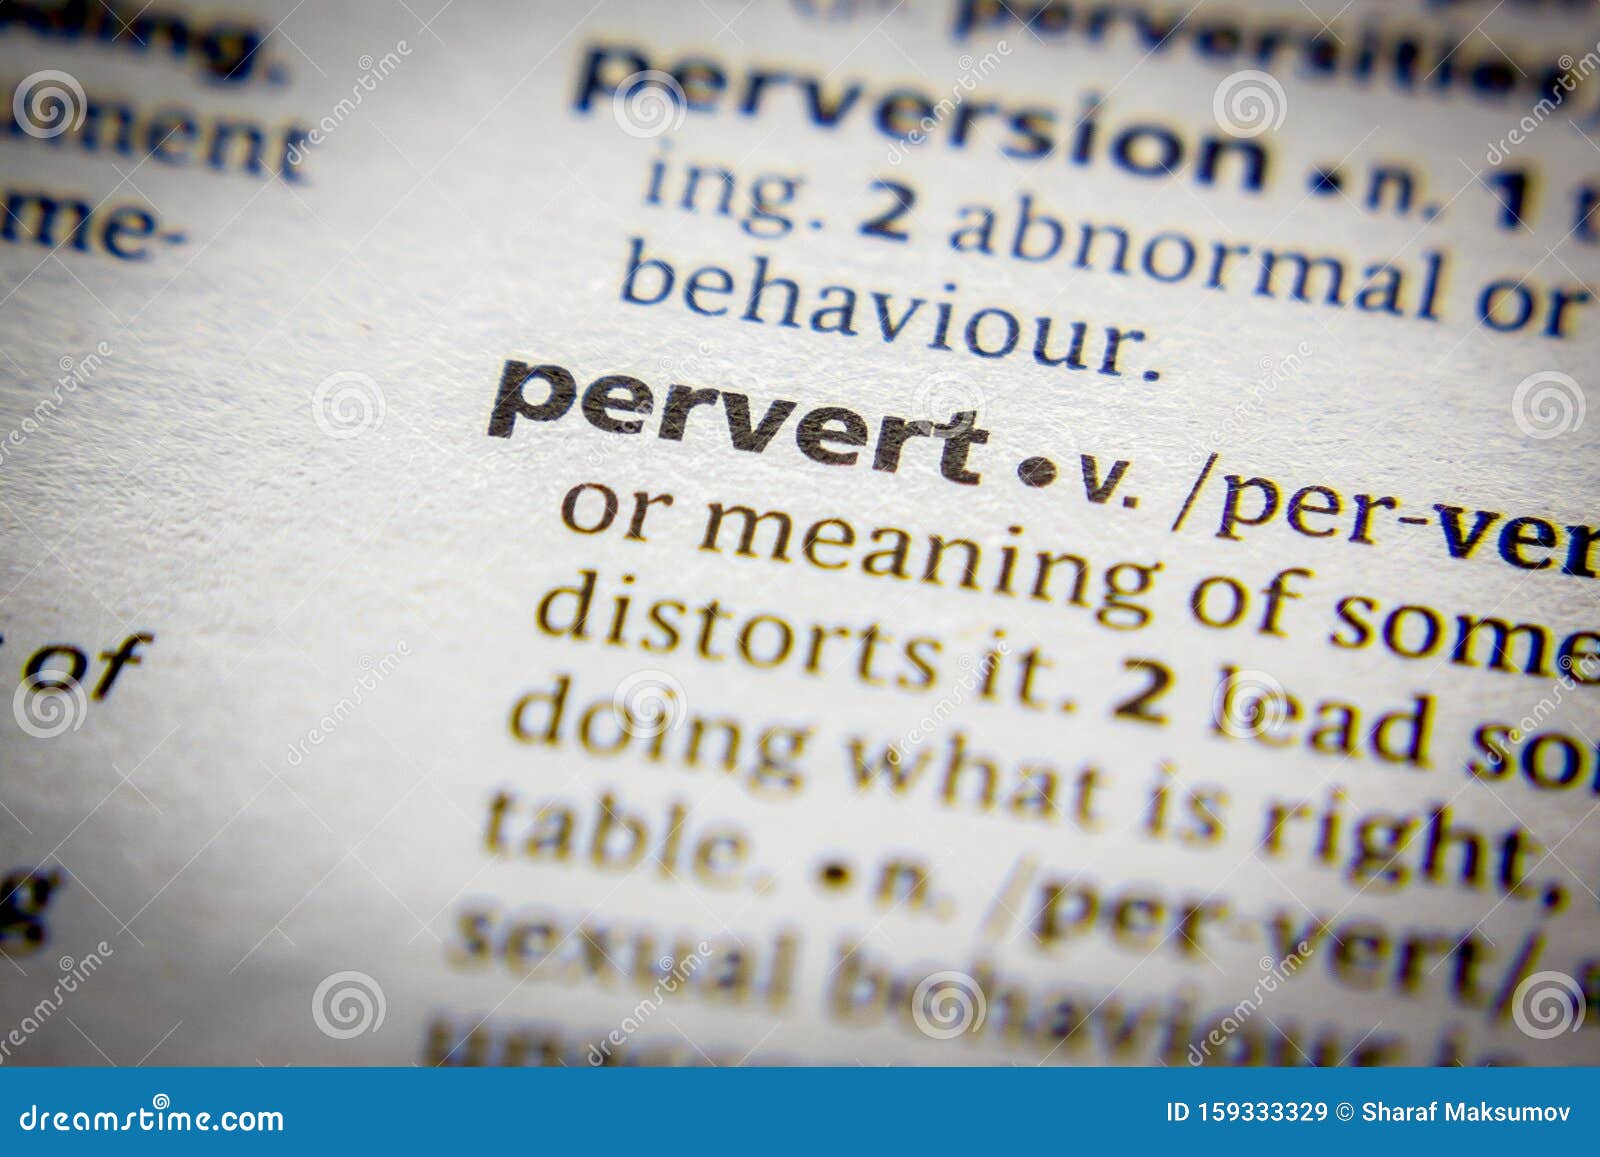 Word or Pervert in a Dictionary Stock Image Image of editorial, 159333329